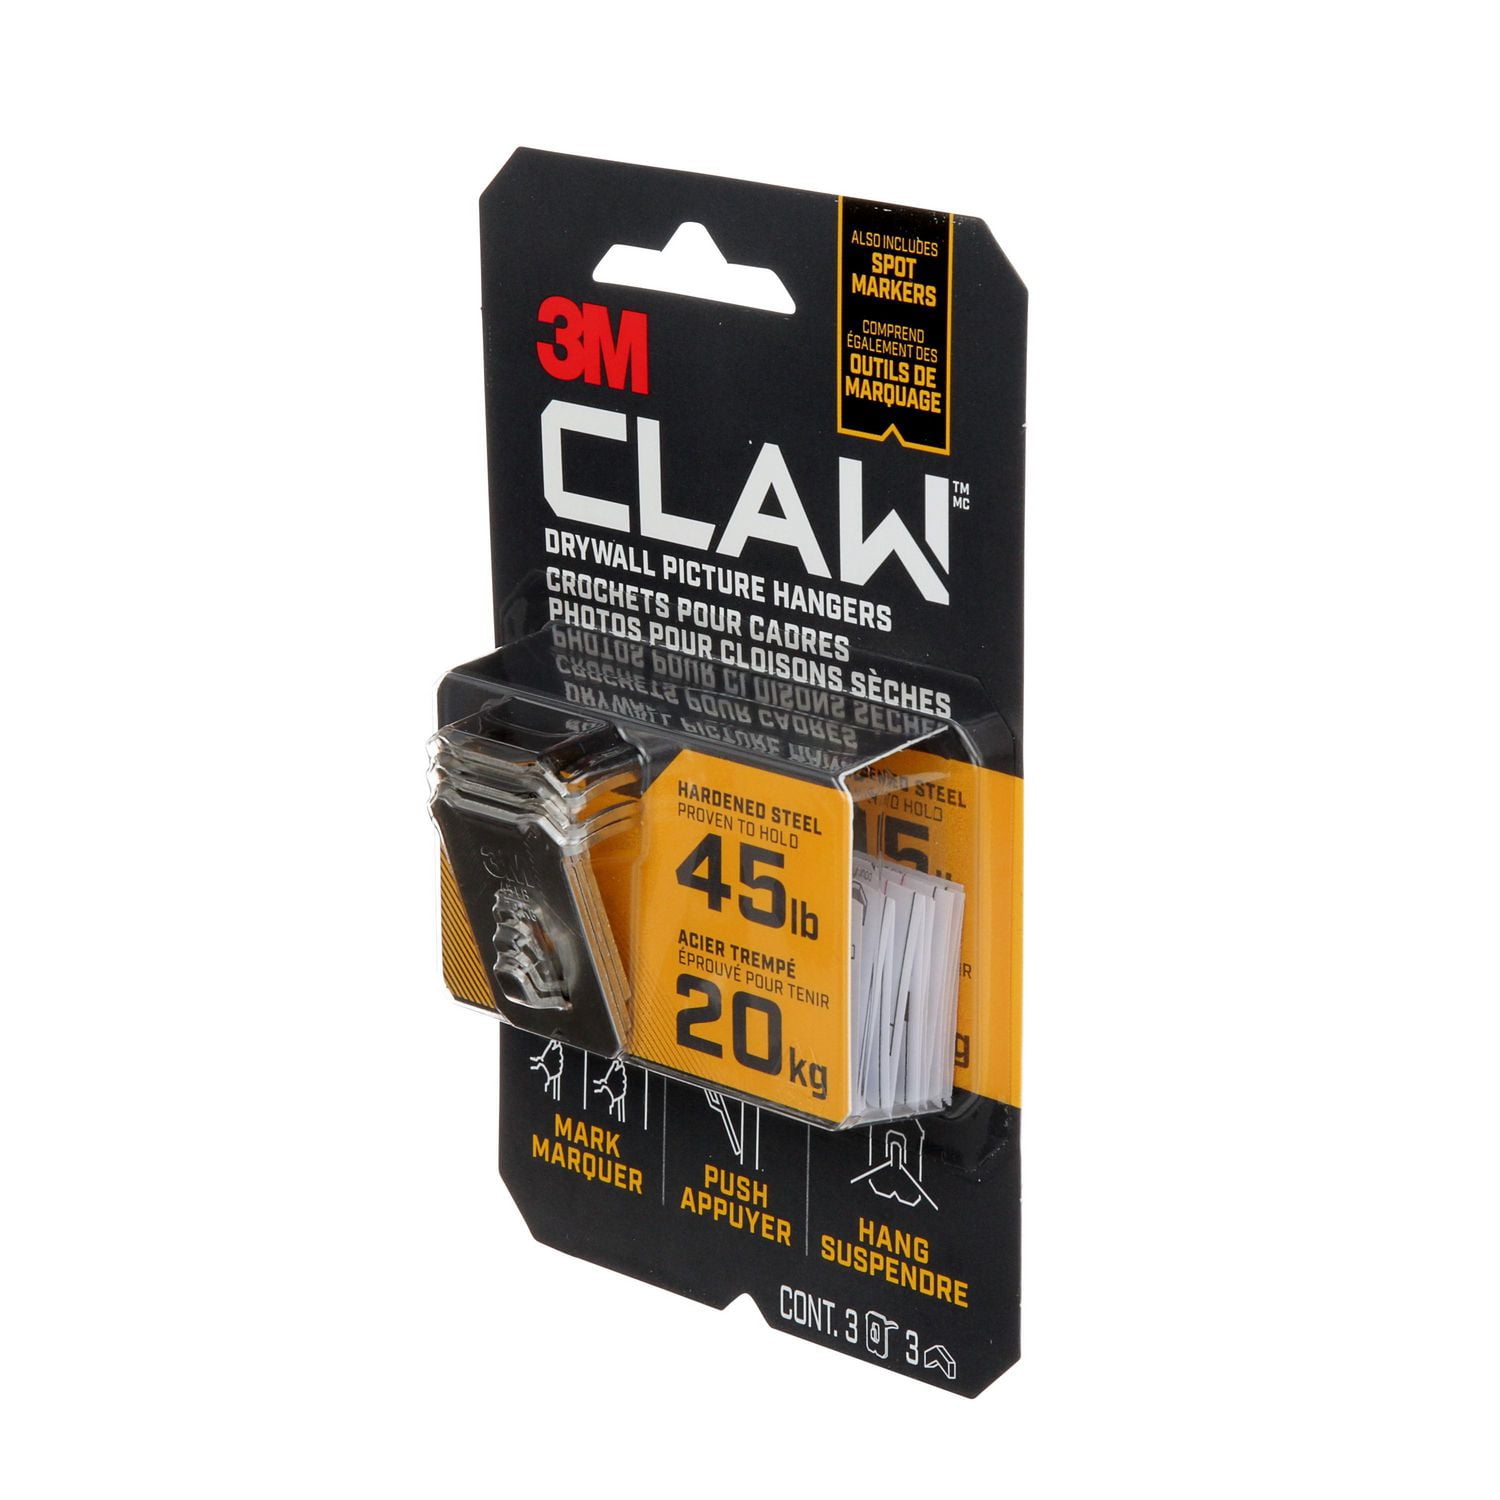 CLAW Drywall Picture Hangers - 45 lb, 3 Pack